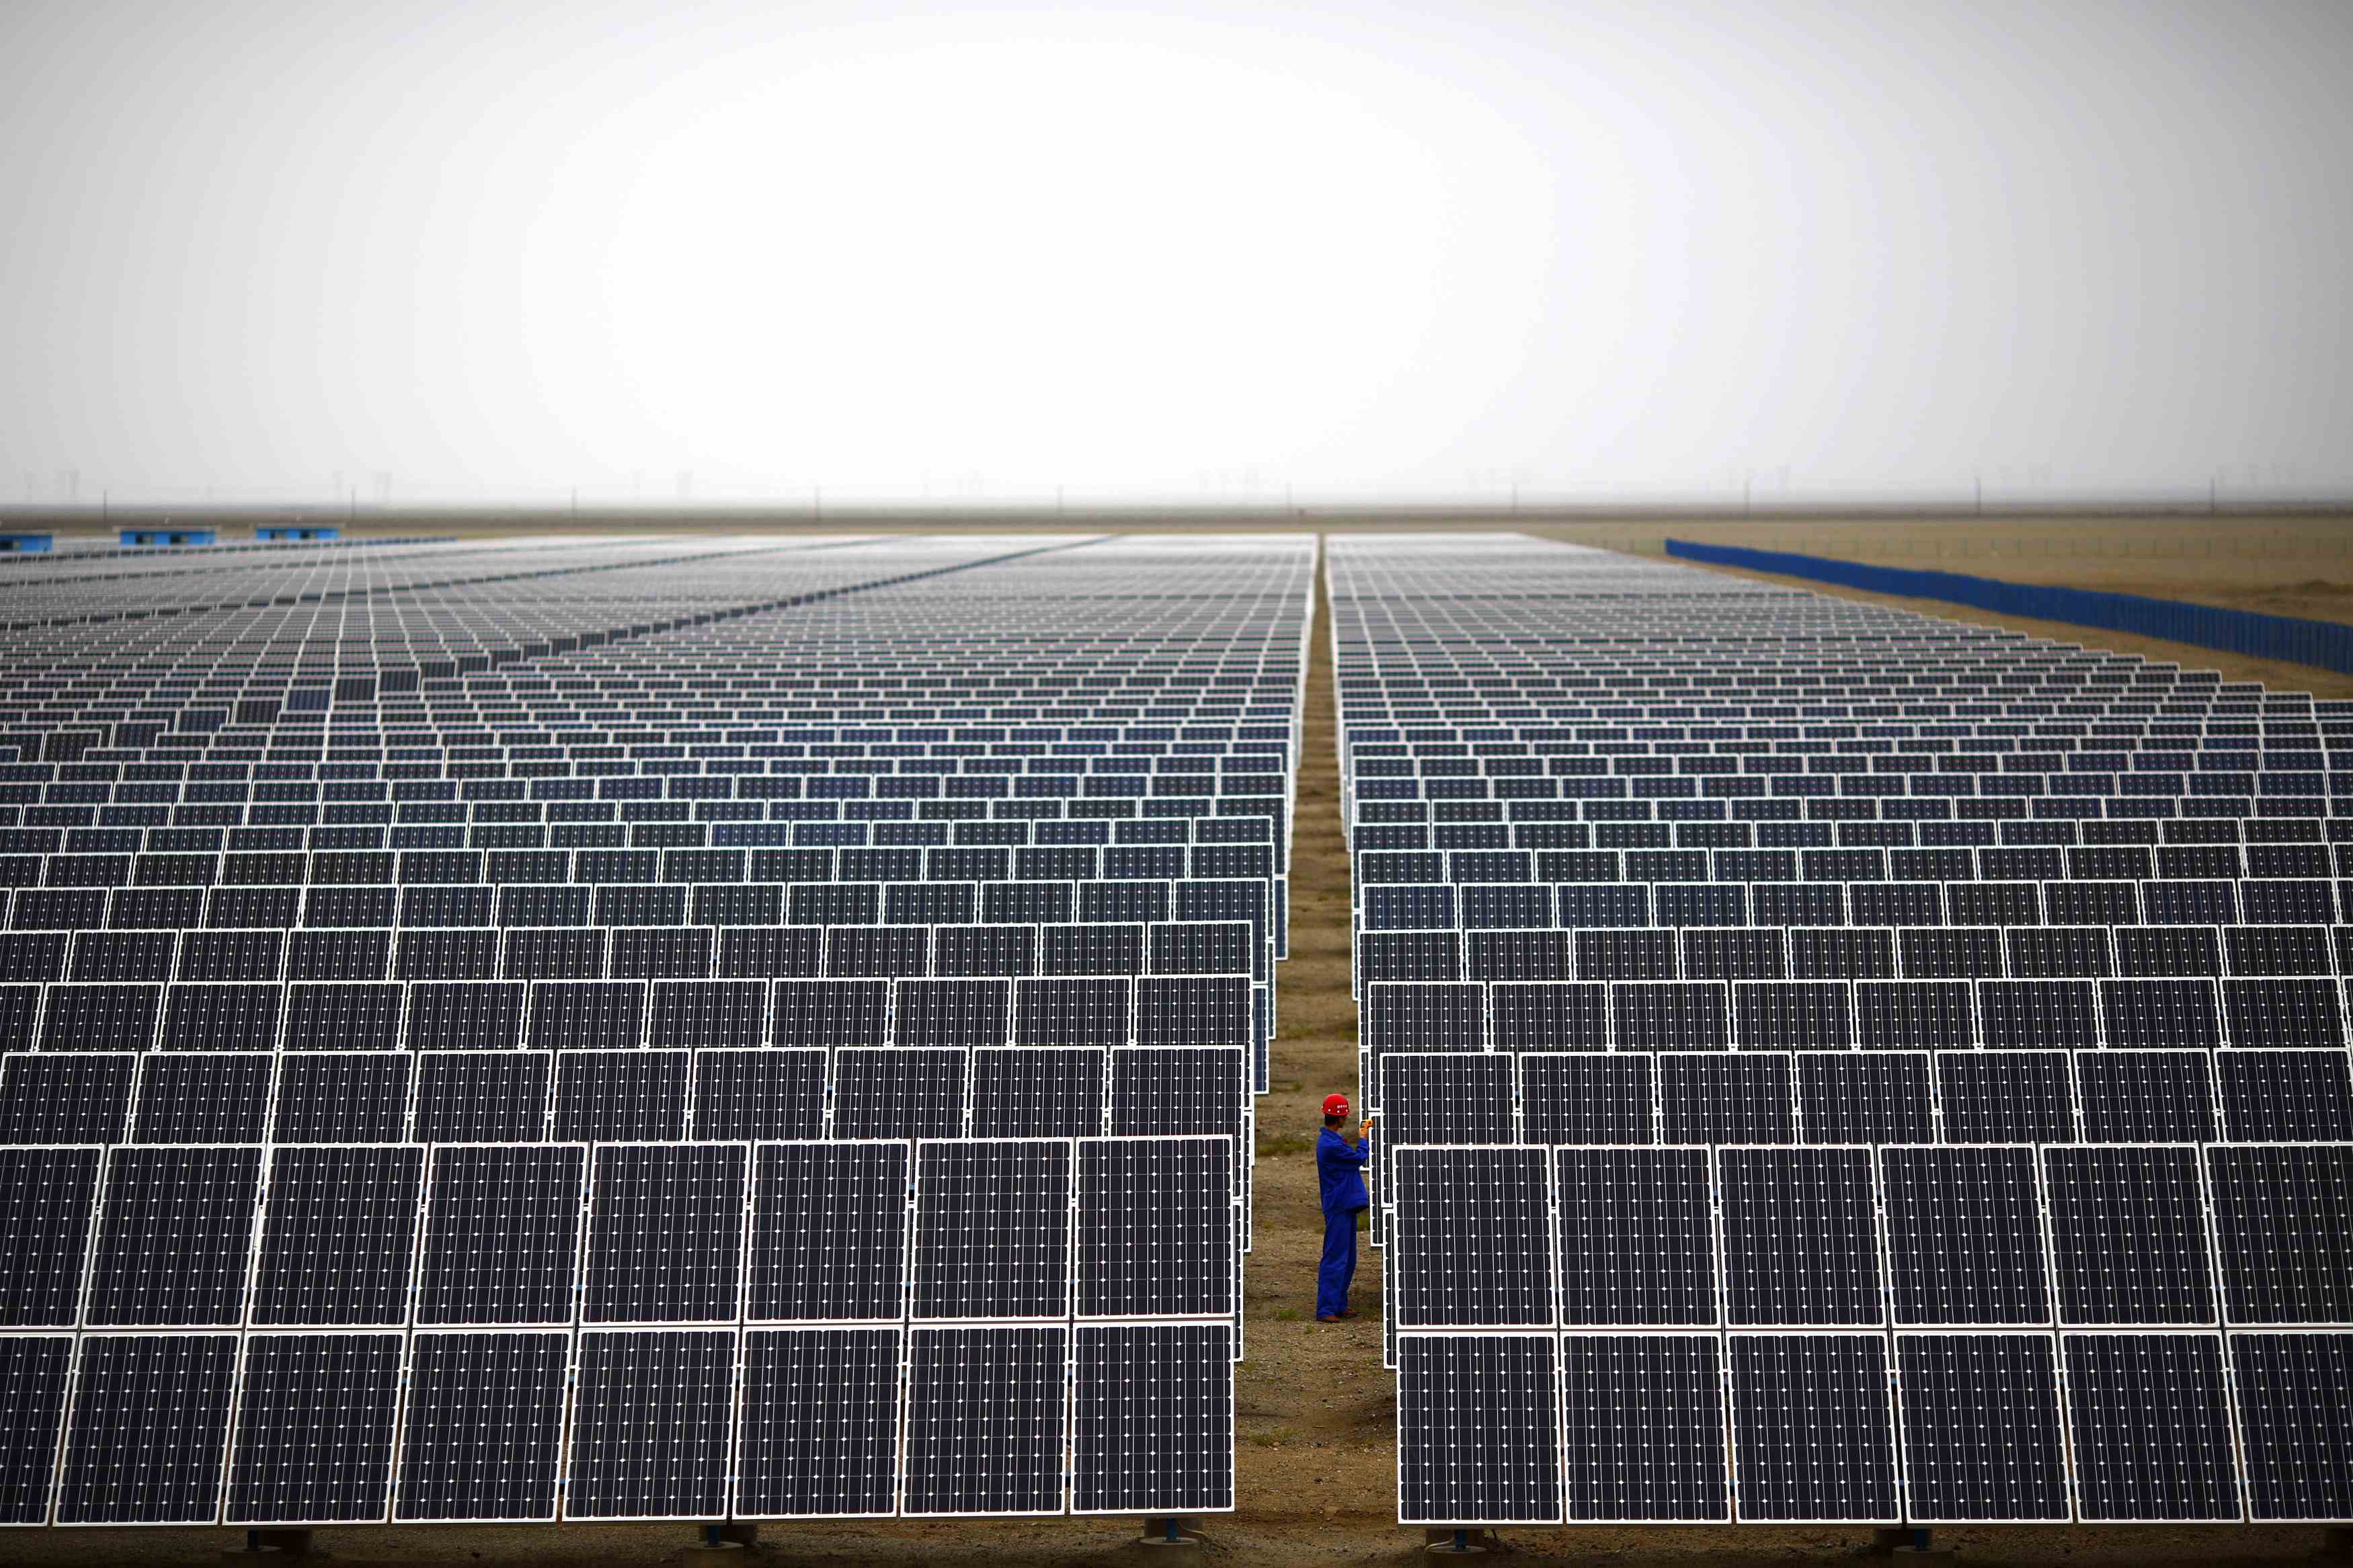 A worker inspects solar panels at a solar farm in Dunhuang, 950km (590 miles) northwest of Lanzhou, Gansu Province September 16, 2013. China's solar panel industry is showing signs of booming again after a prolonged downturn - raising fears of another bust when the splurge of public money that is driving a spike in demand dries up. Lured by generous power tariffs and financing support to promote renewable energy, Chinese firms are racing to develop multi-billion dollar solar generating projects in the Gobi desert and barren hills of China's vast north and northwest. Picture taken on September 16, 2013. REUTERS/Carlos Barria (CHINA - Tags: BUSINESS ENERGY)